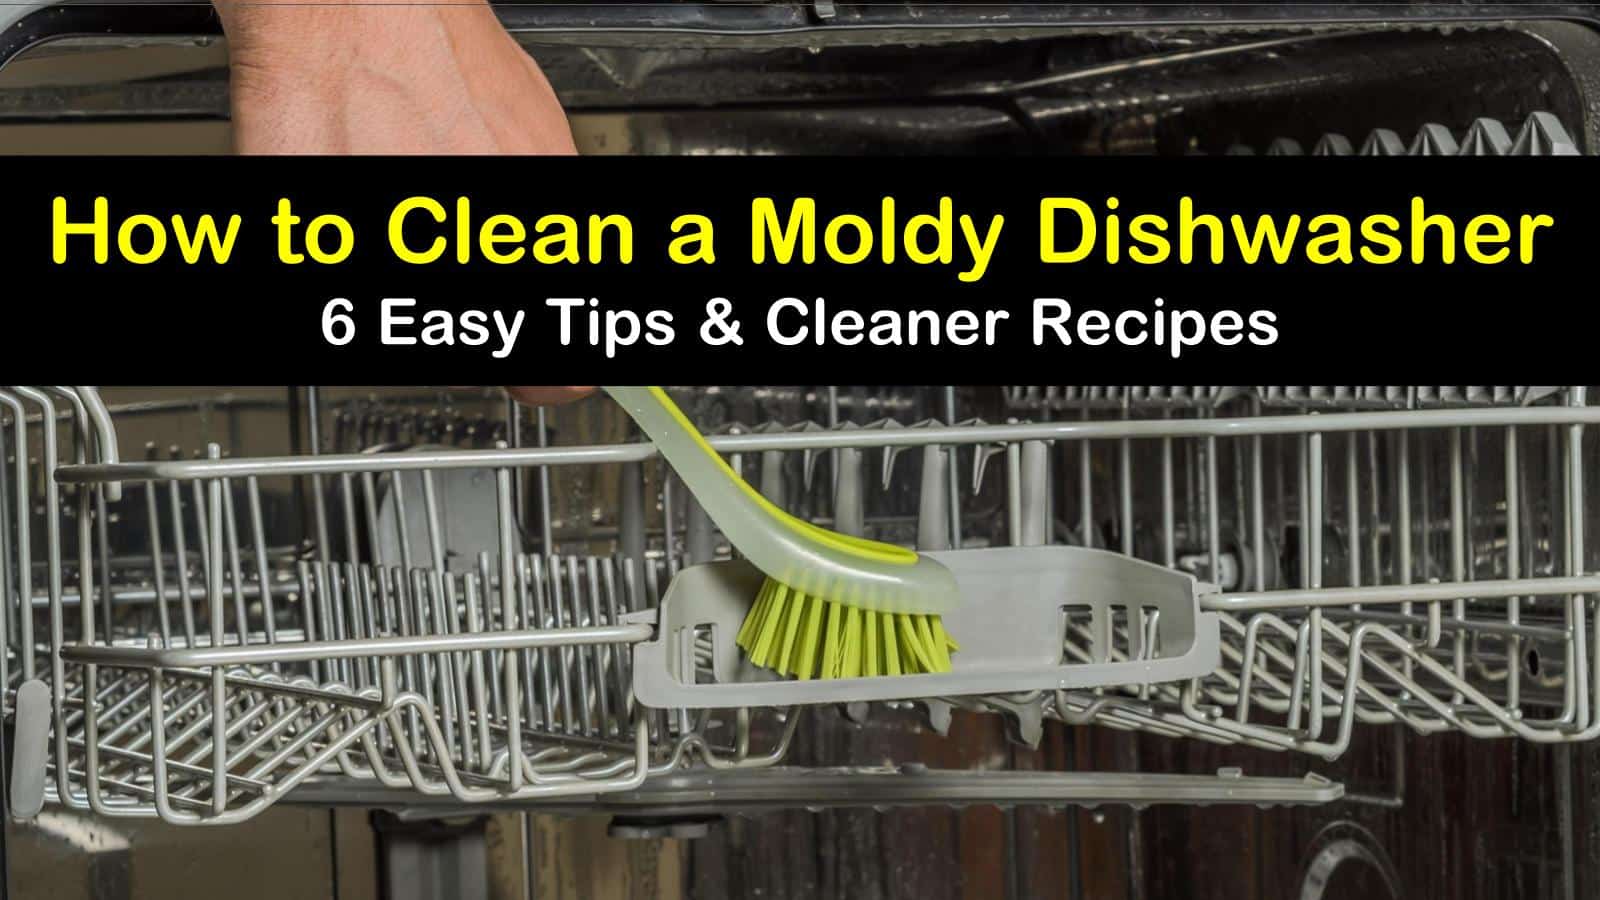 how to clean a moldy dishwasher titleimg1